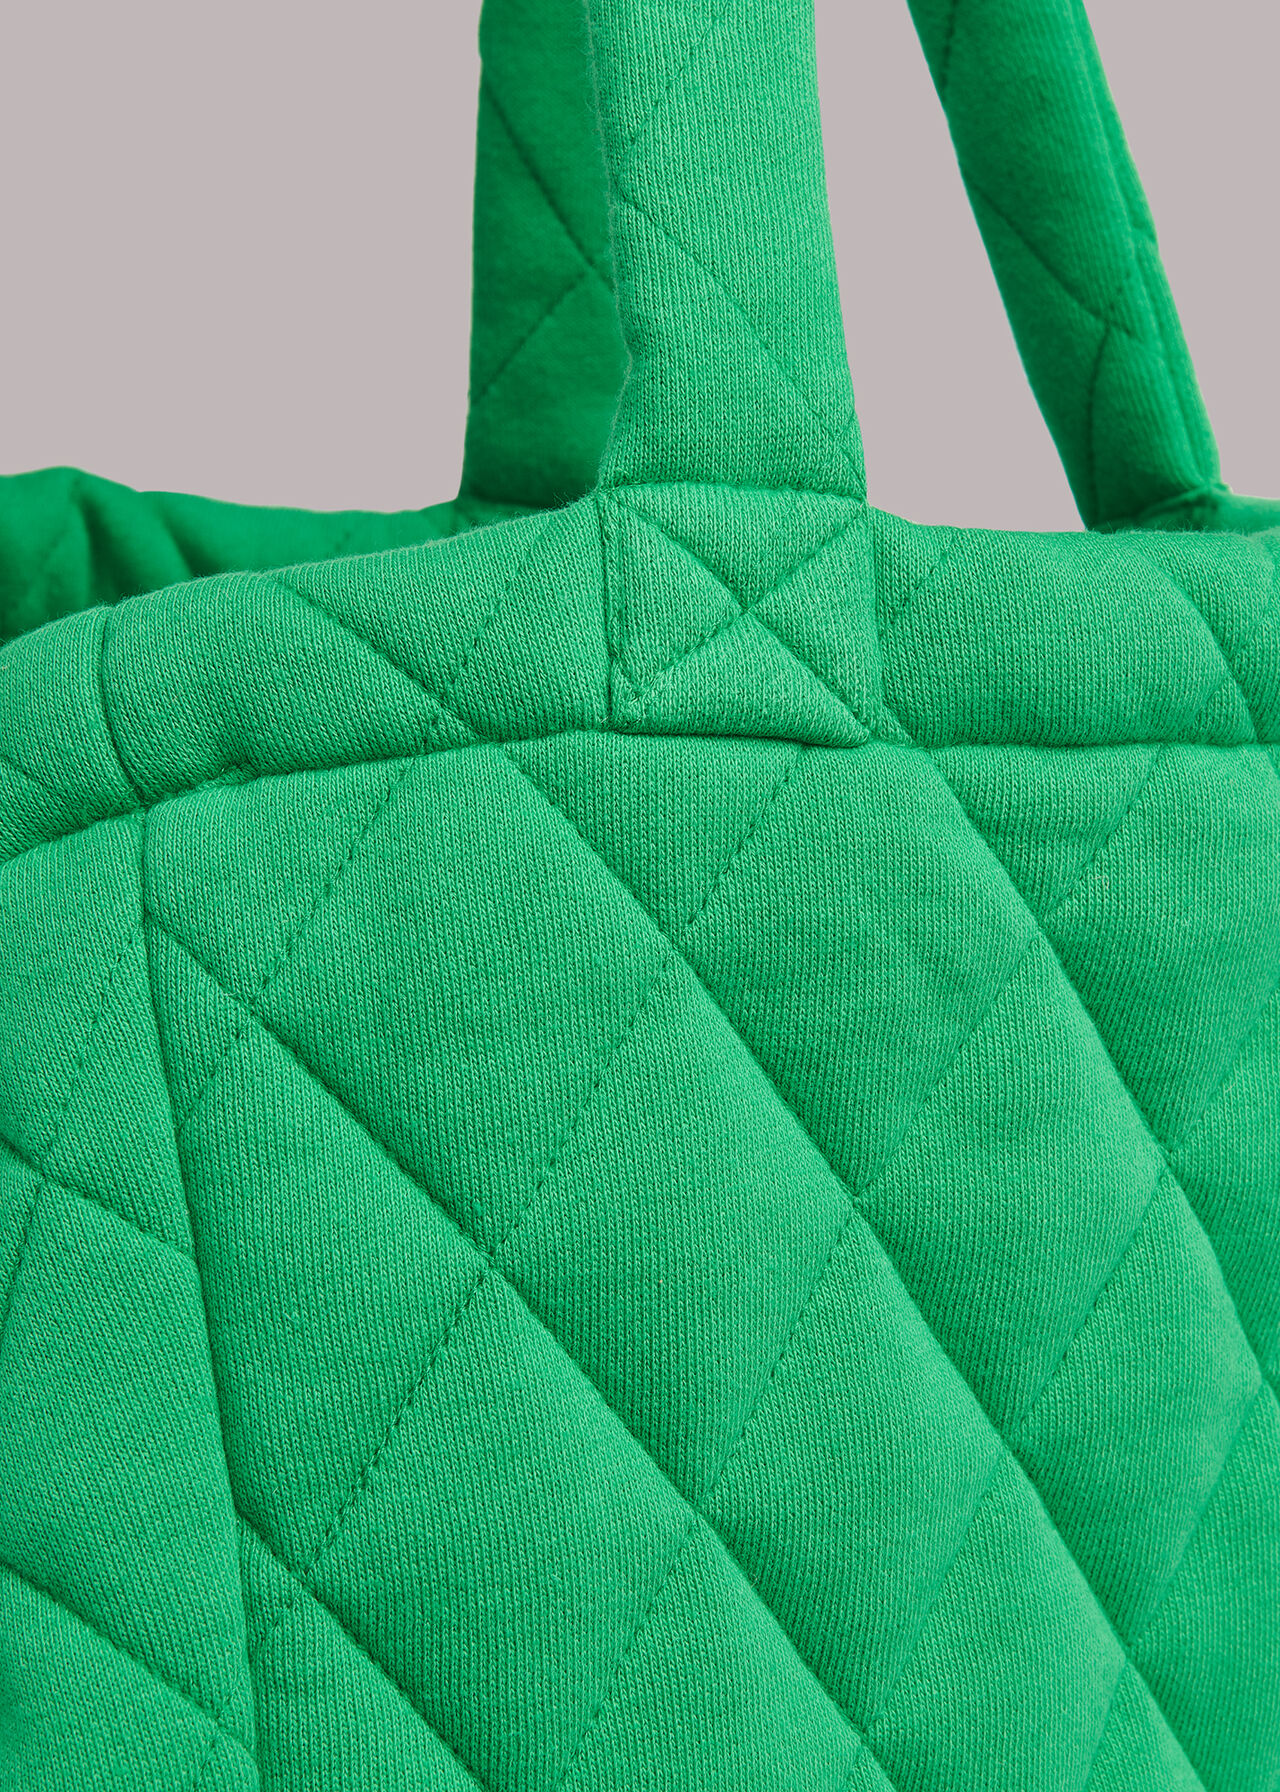 Green Lyle Quilted Tote Bag, WHISTLES